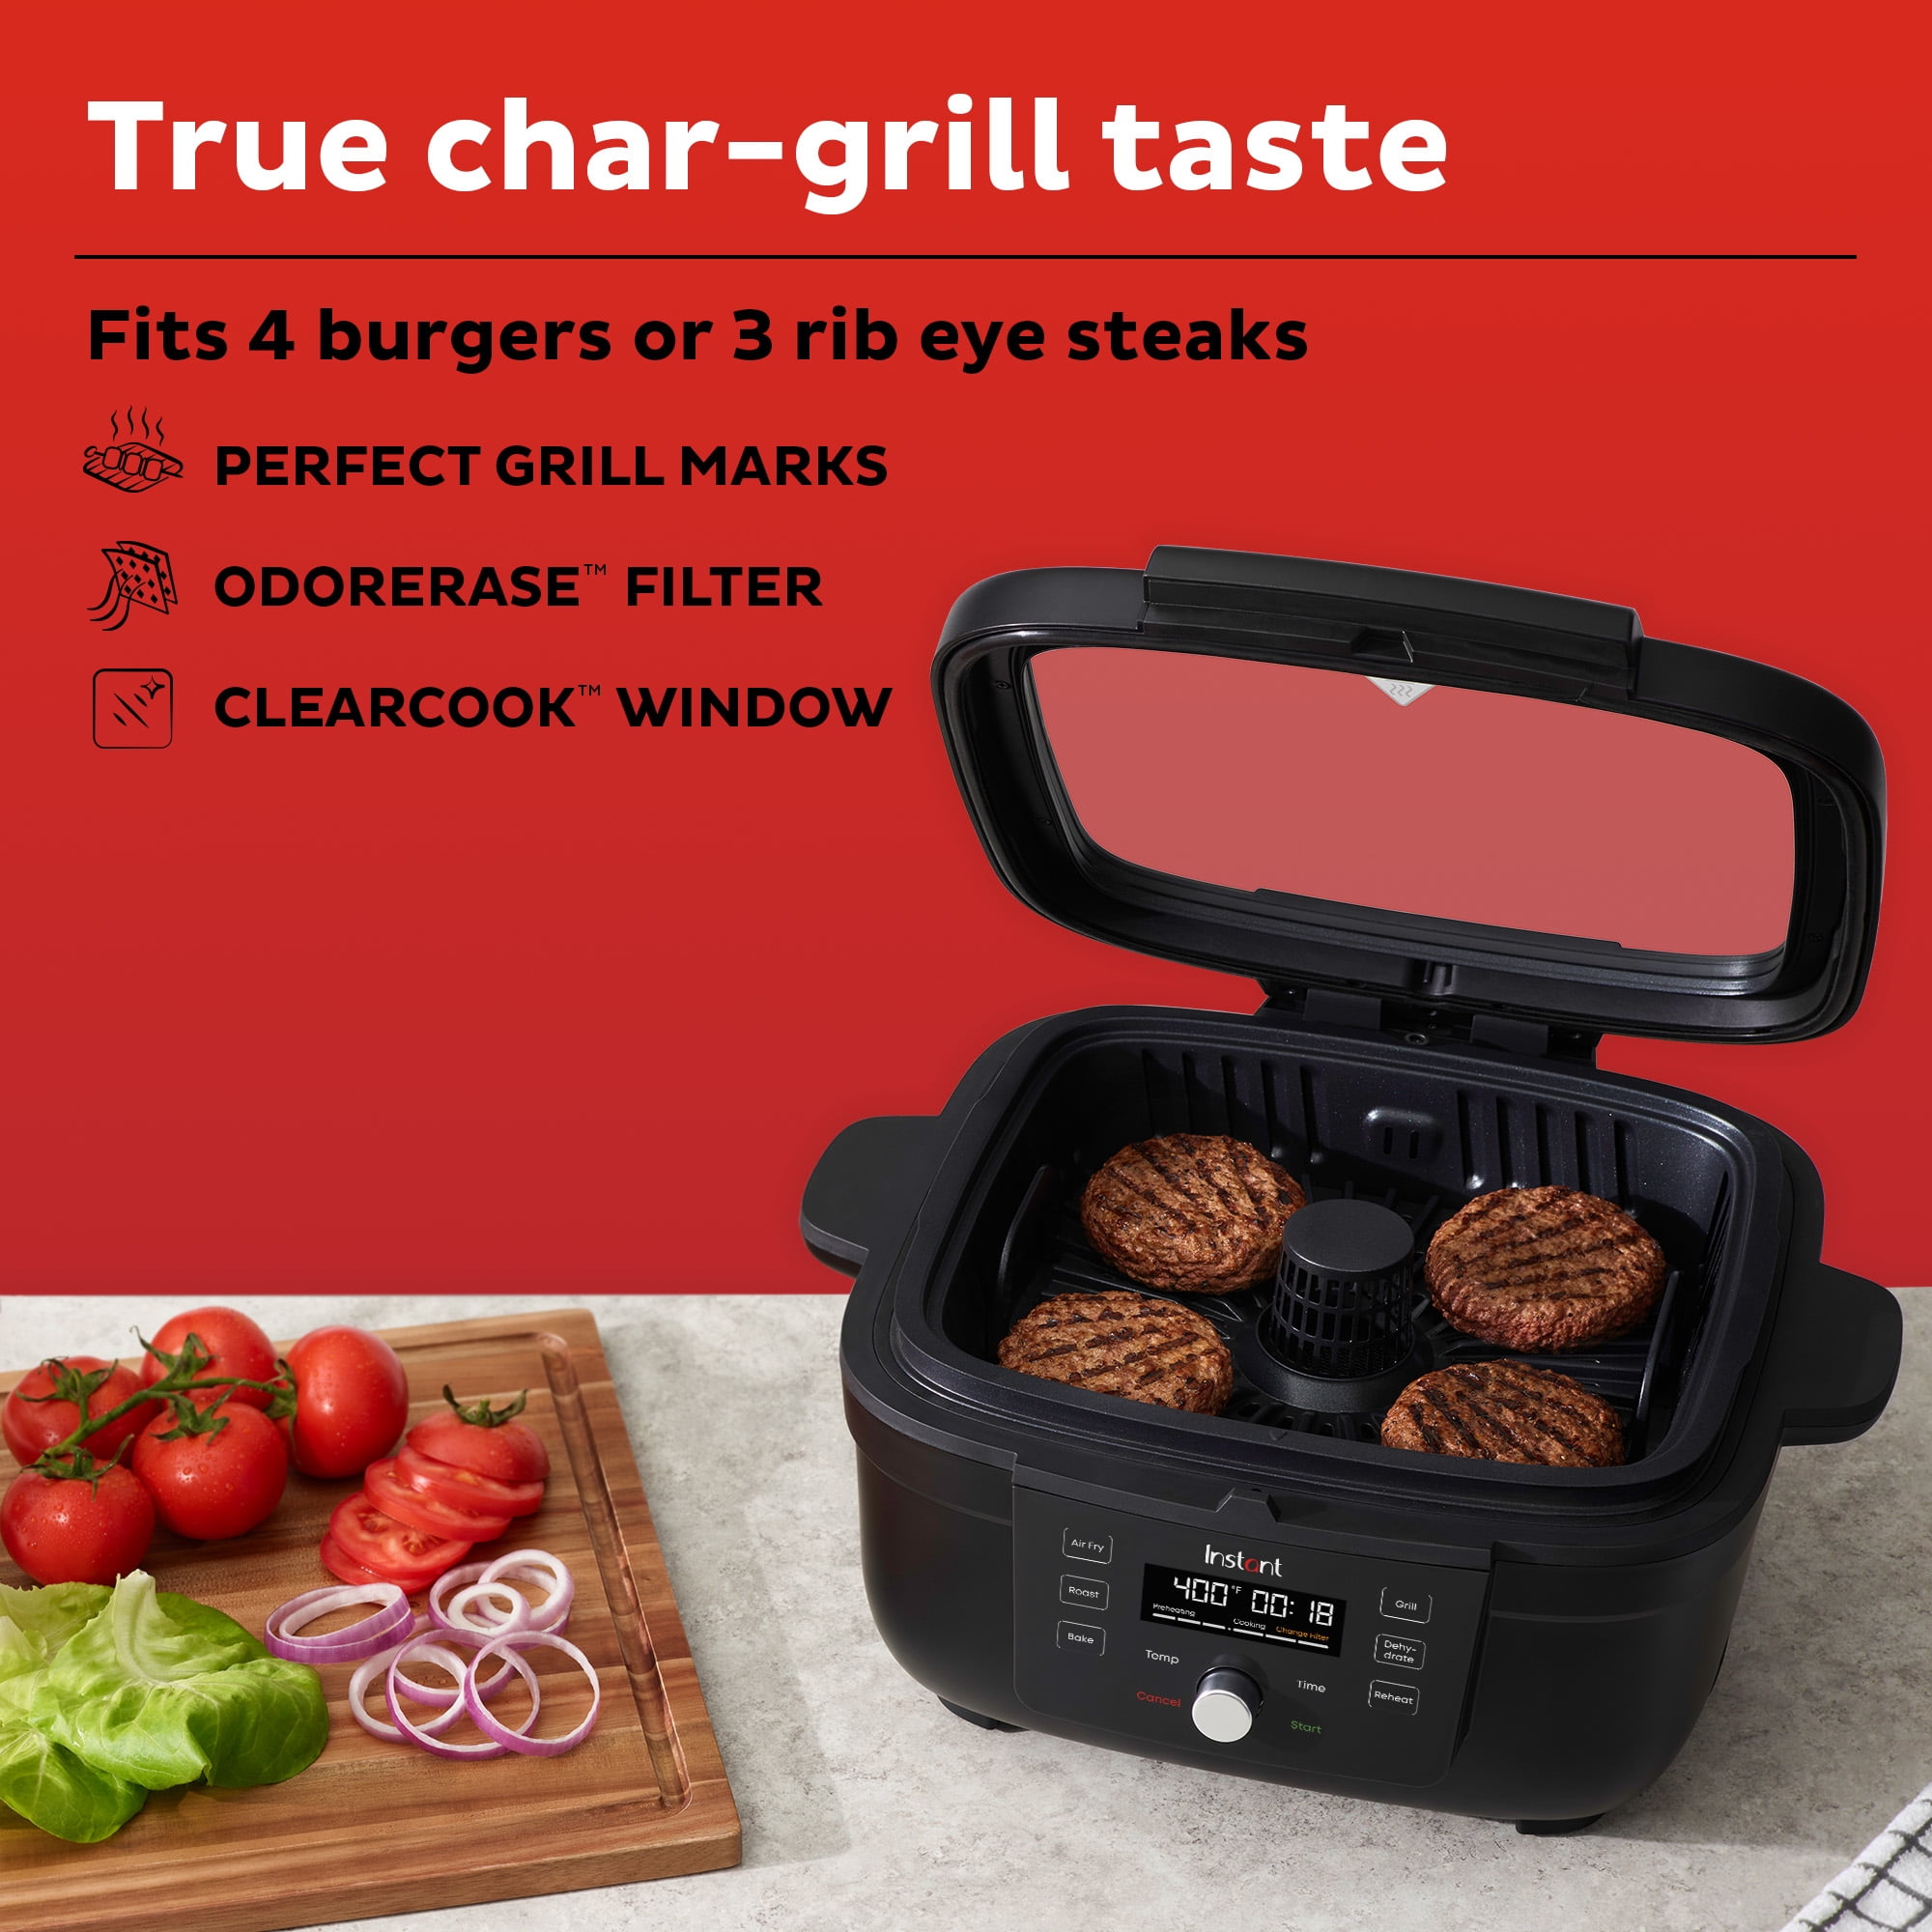 Aursk 6.15 Liter Grill and Air Fryer